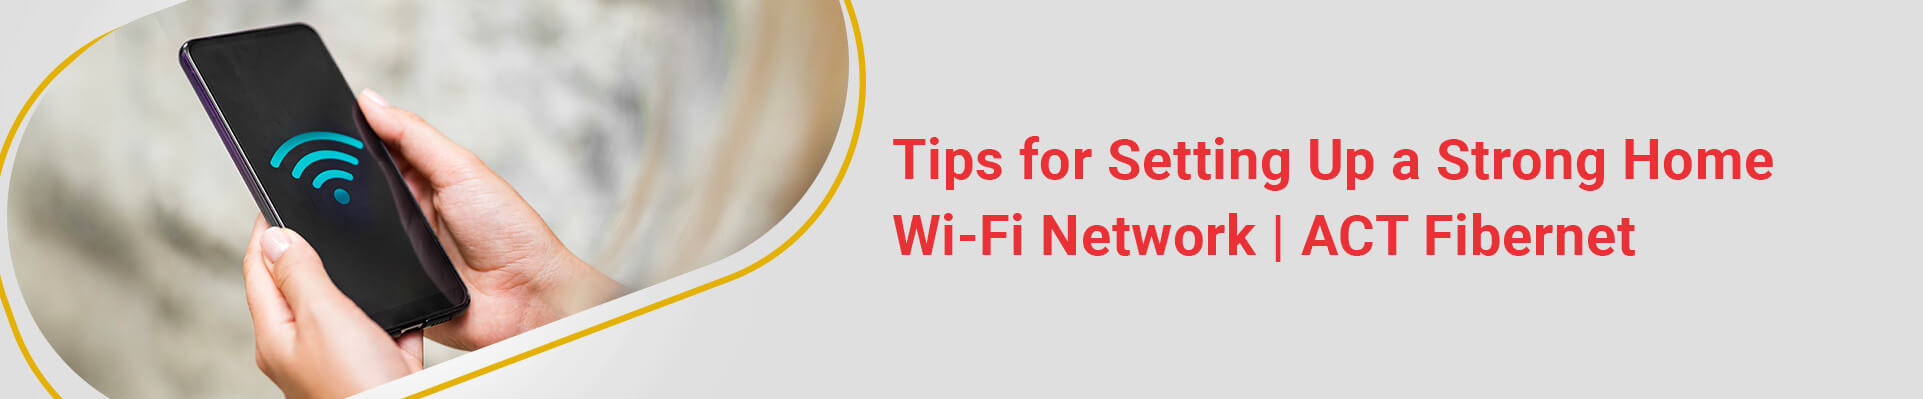 How to Set Up Wi-Fi at Home?